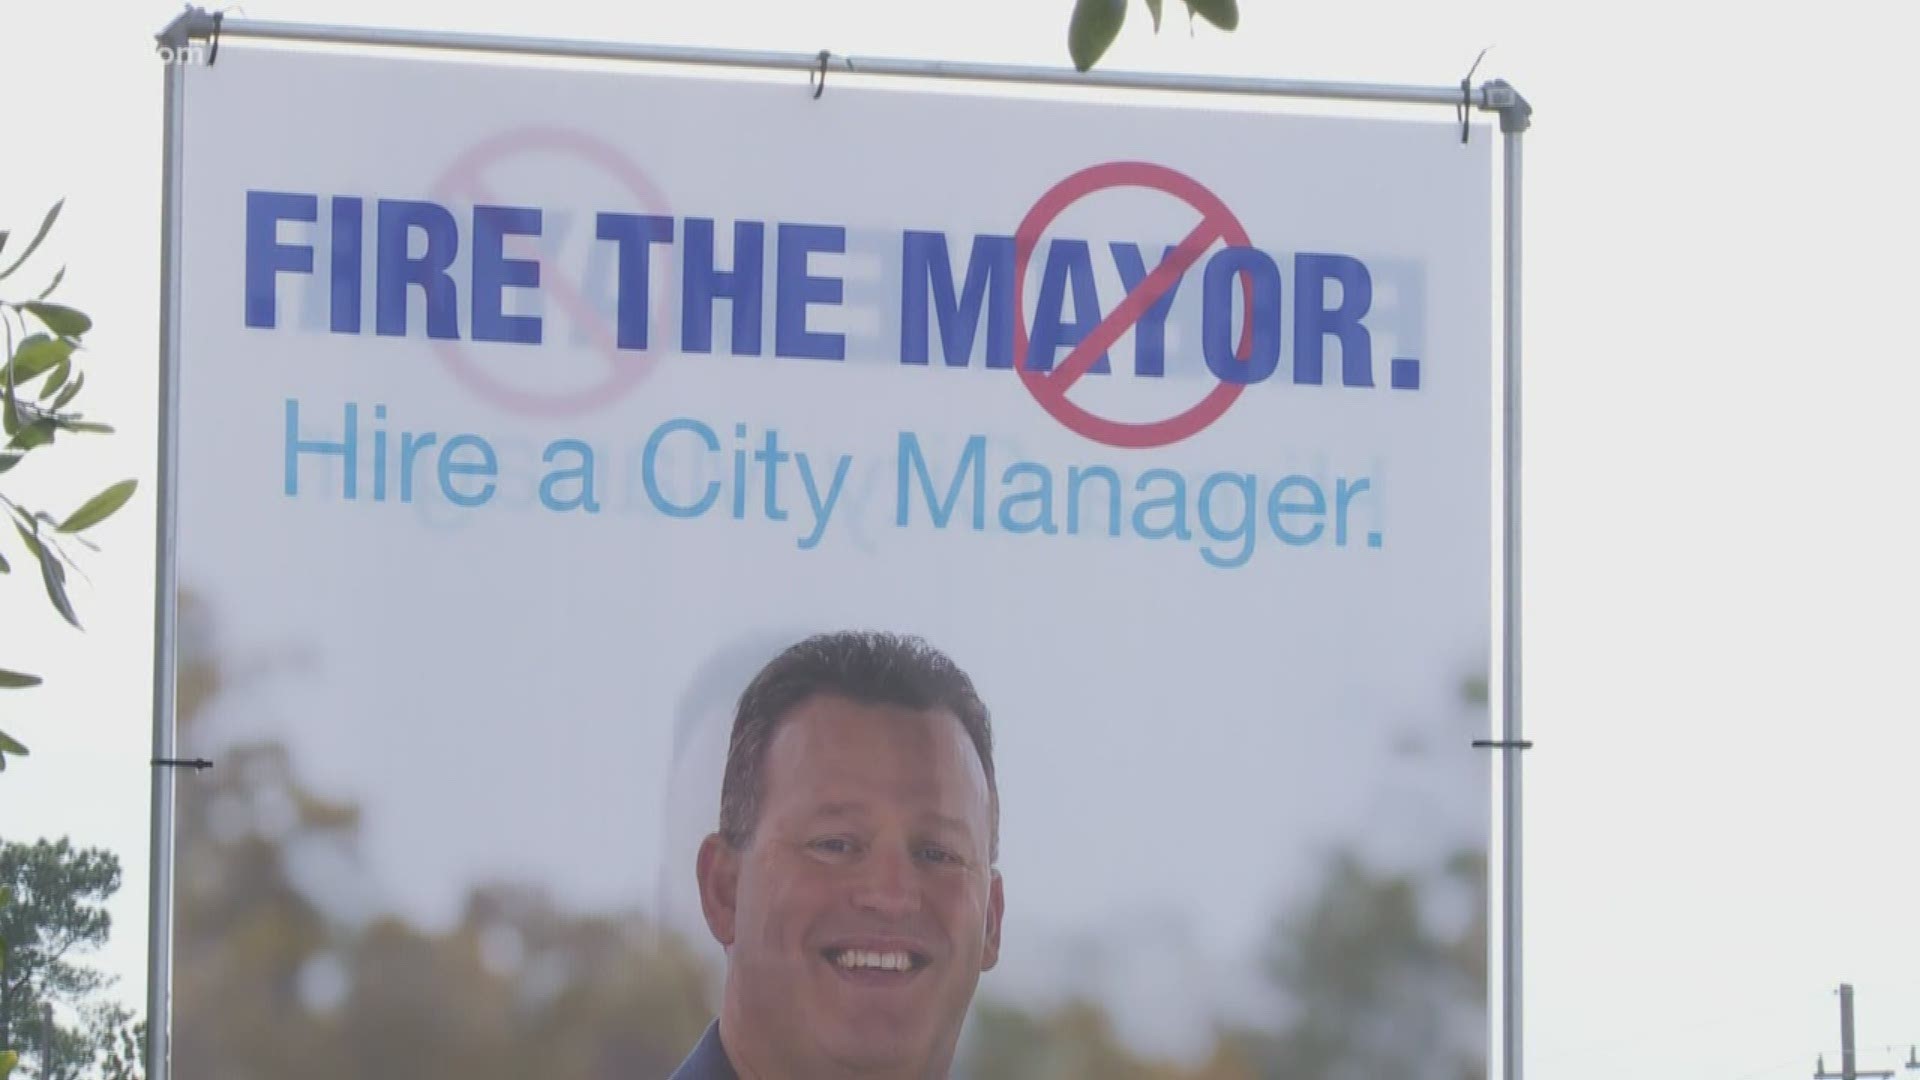 Bordelon’s campaign signs state his campaign concisely: “Fire the mayor. Hire a city manager.”